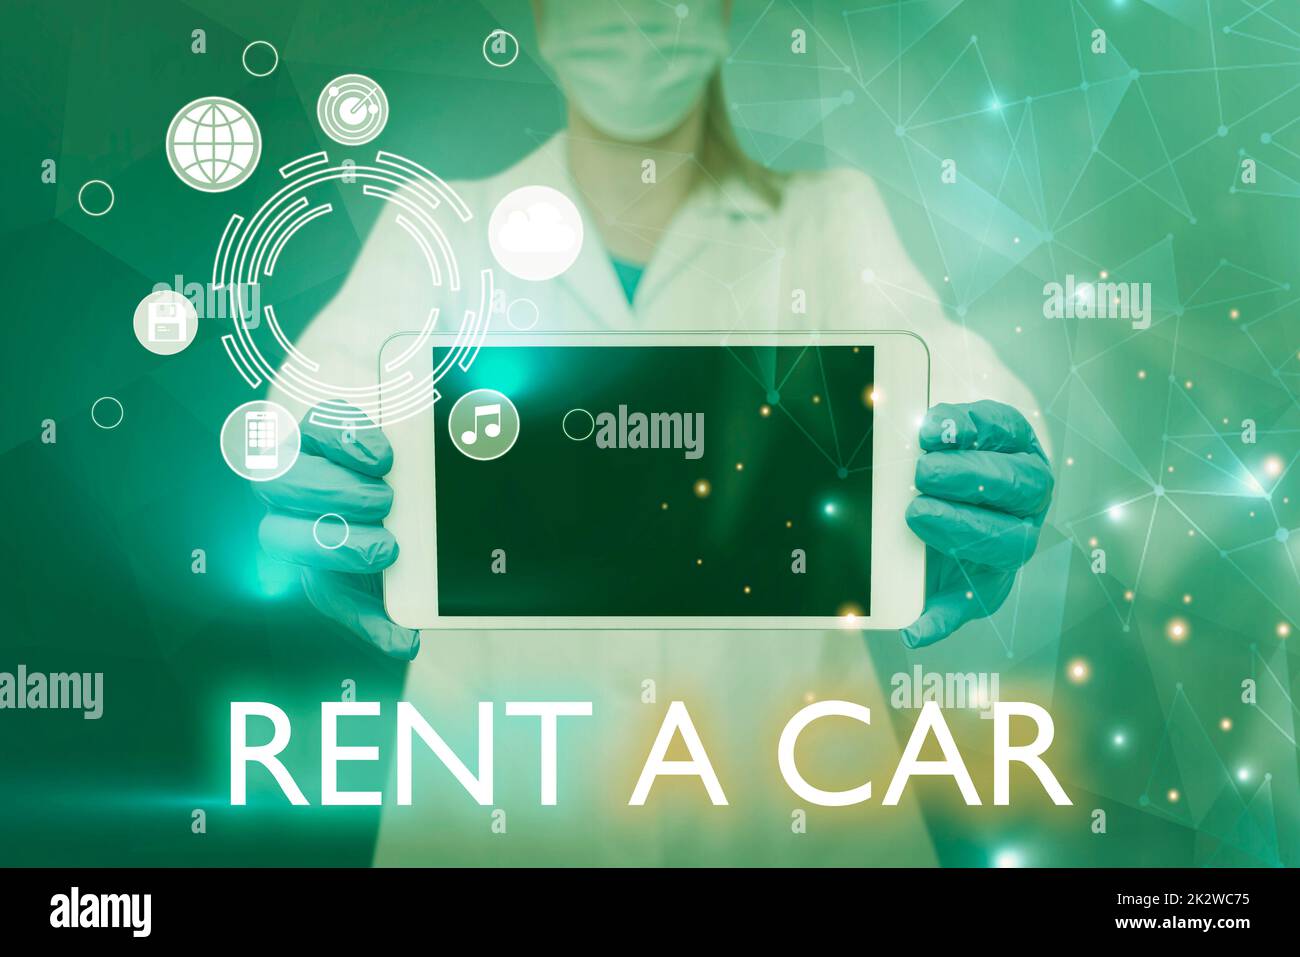 Sign displaying Rent A Car. Business showcase paying for temporary vehicle usage from one day to months Nurse holding tablet symbolizing successful teamwork accomplishments. Stock Photo